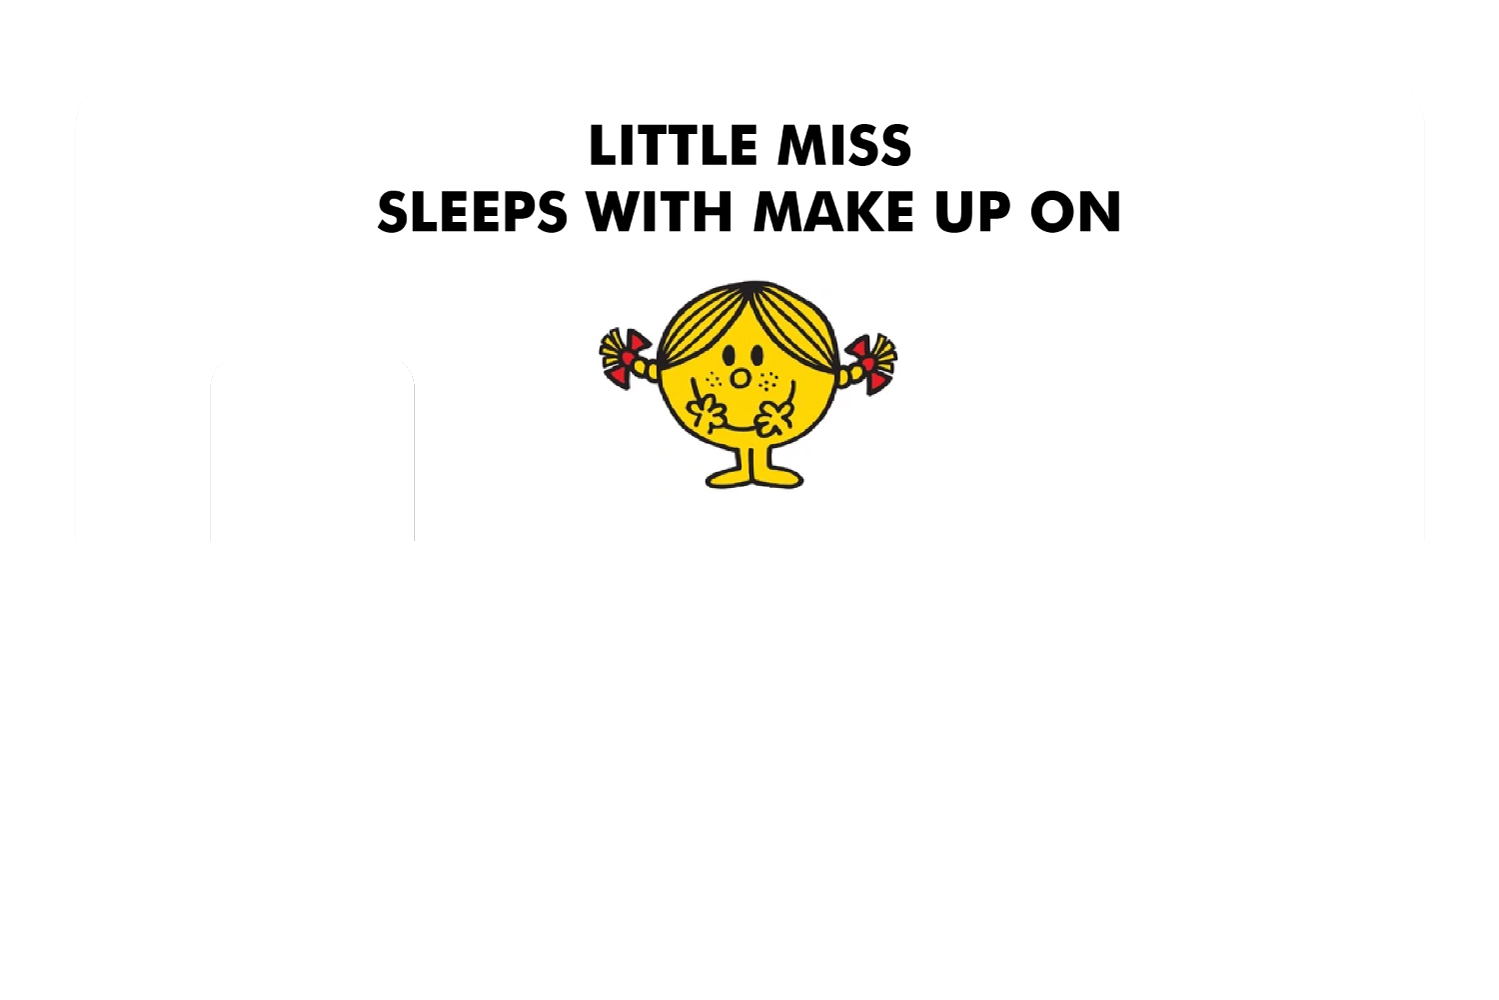 Little Miss Sleeps With Make up On